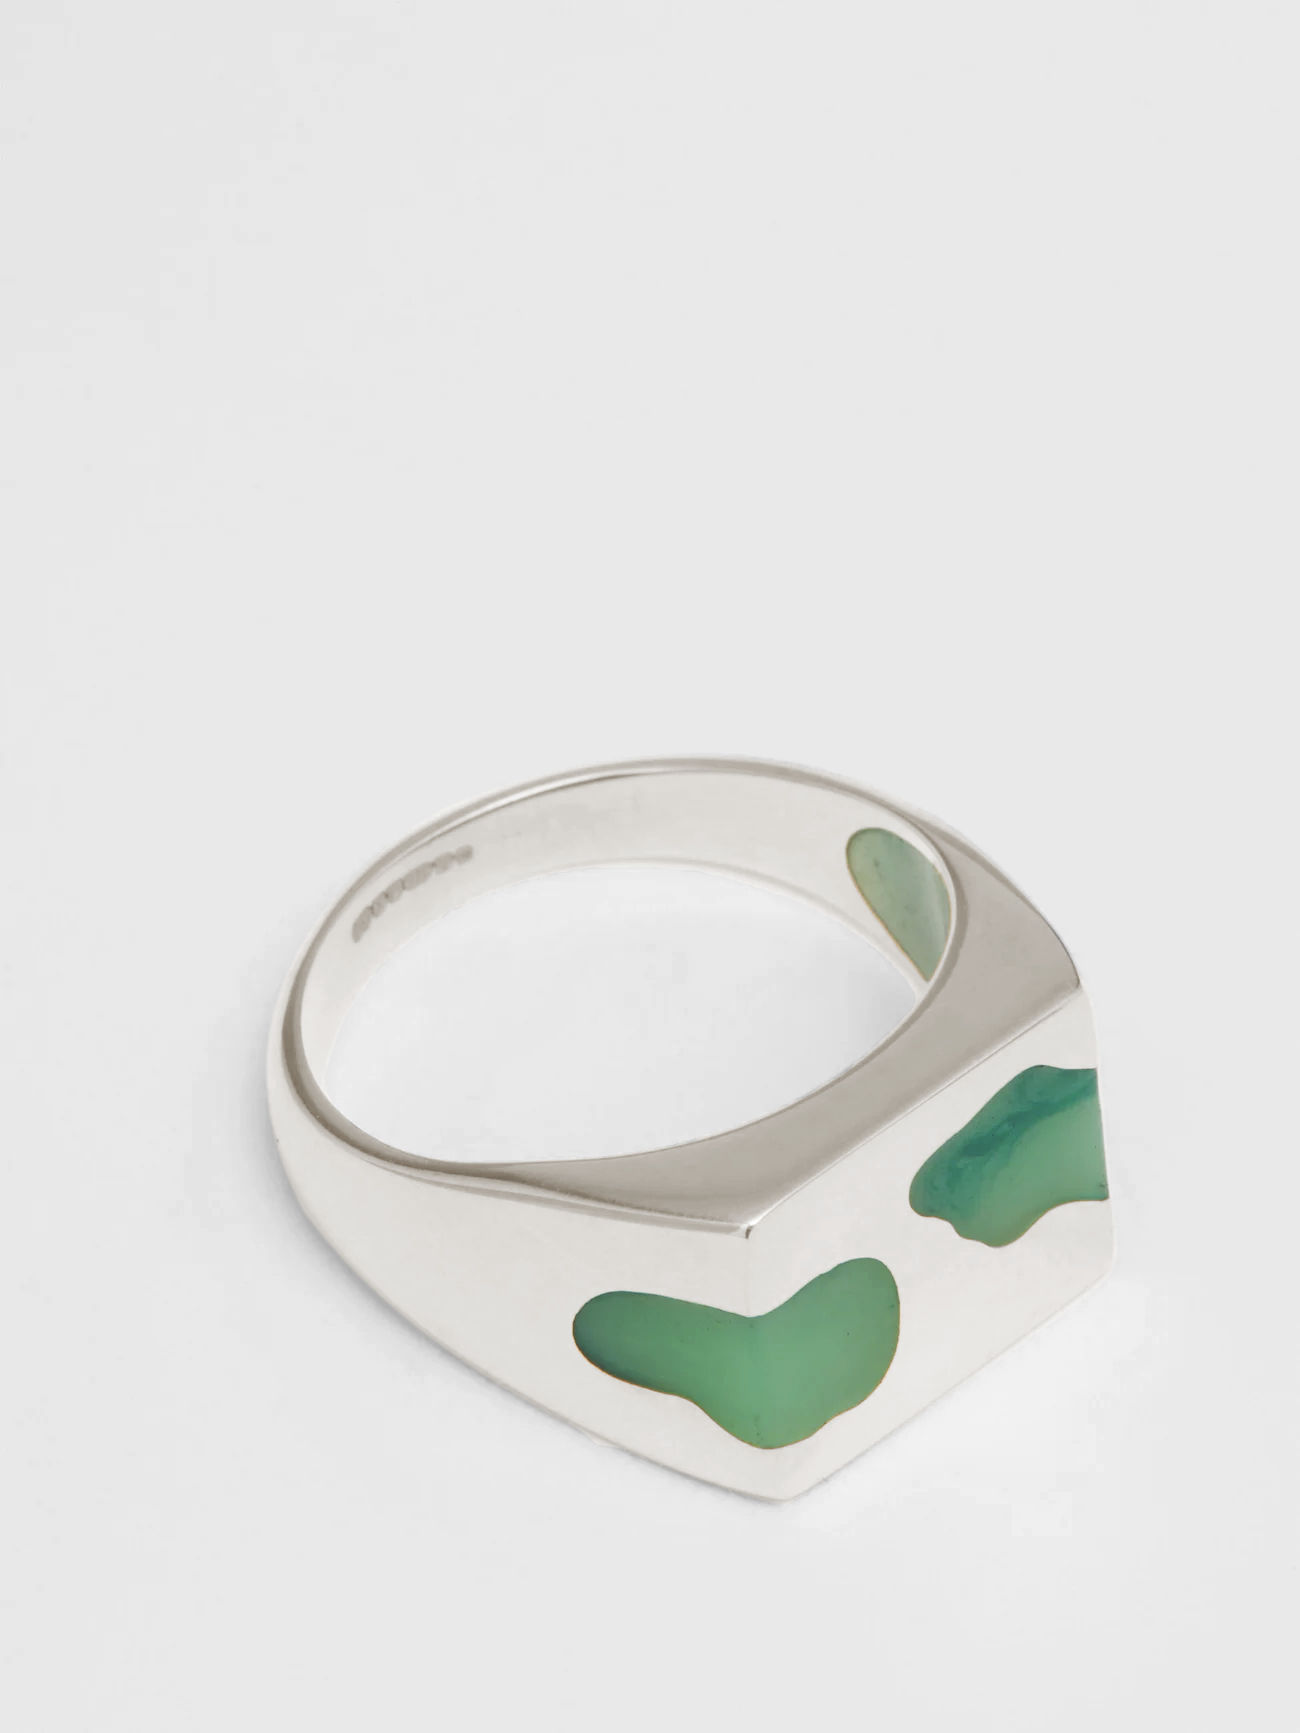 TWO PIECE RING - GREEN RESIN